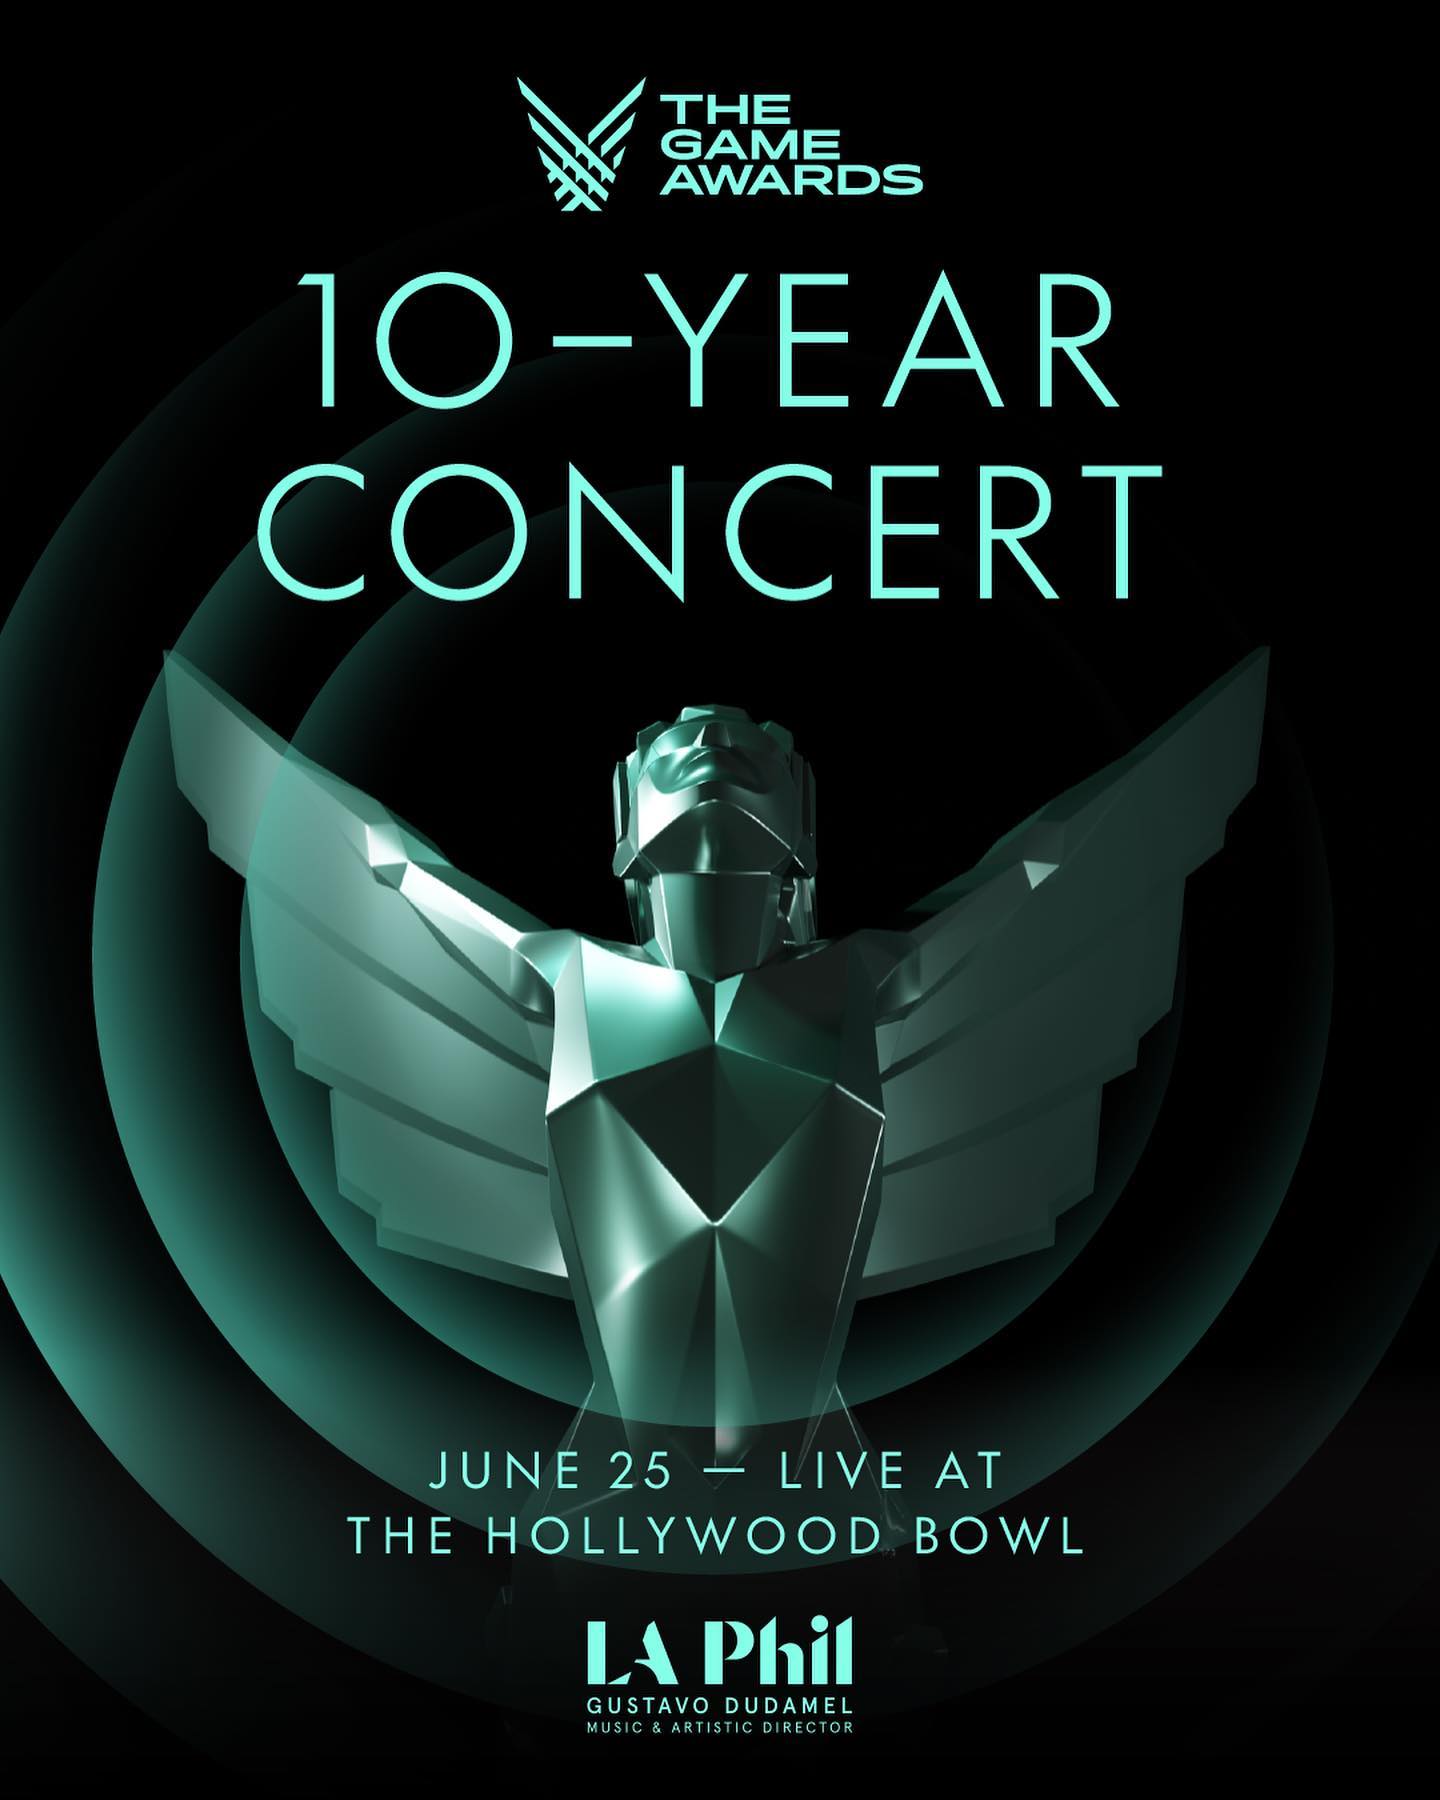 The Game Awards 10-Year Concert with Fireworks – Hollywood Bowl